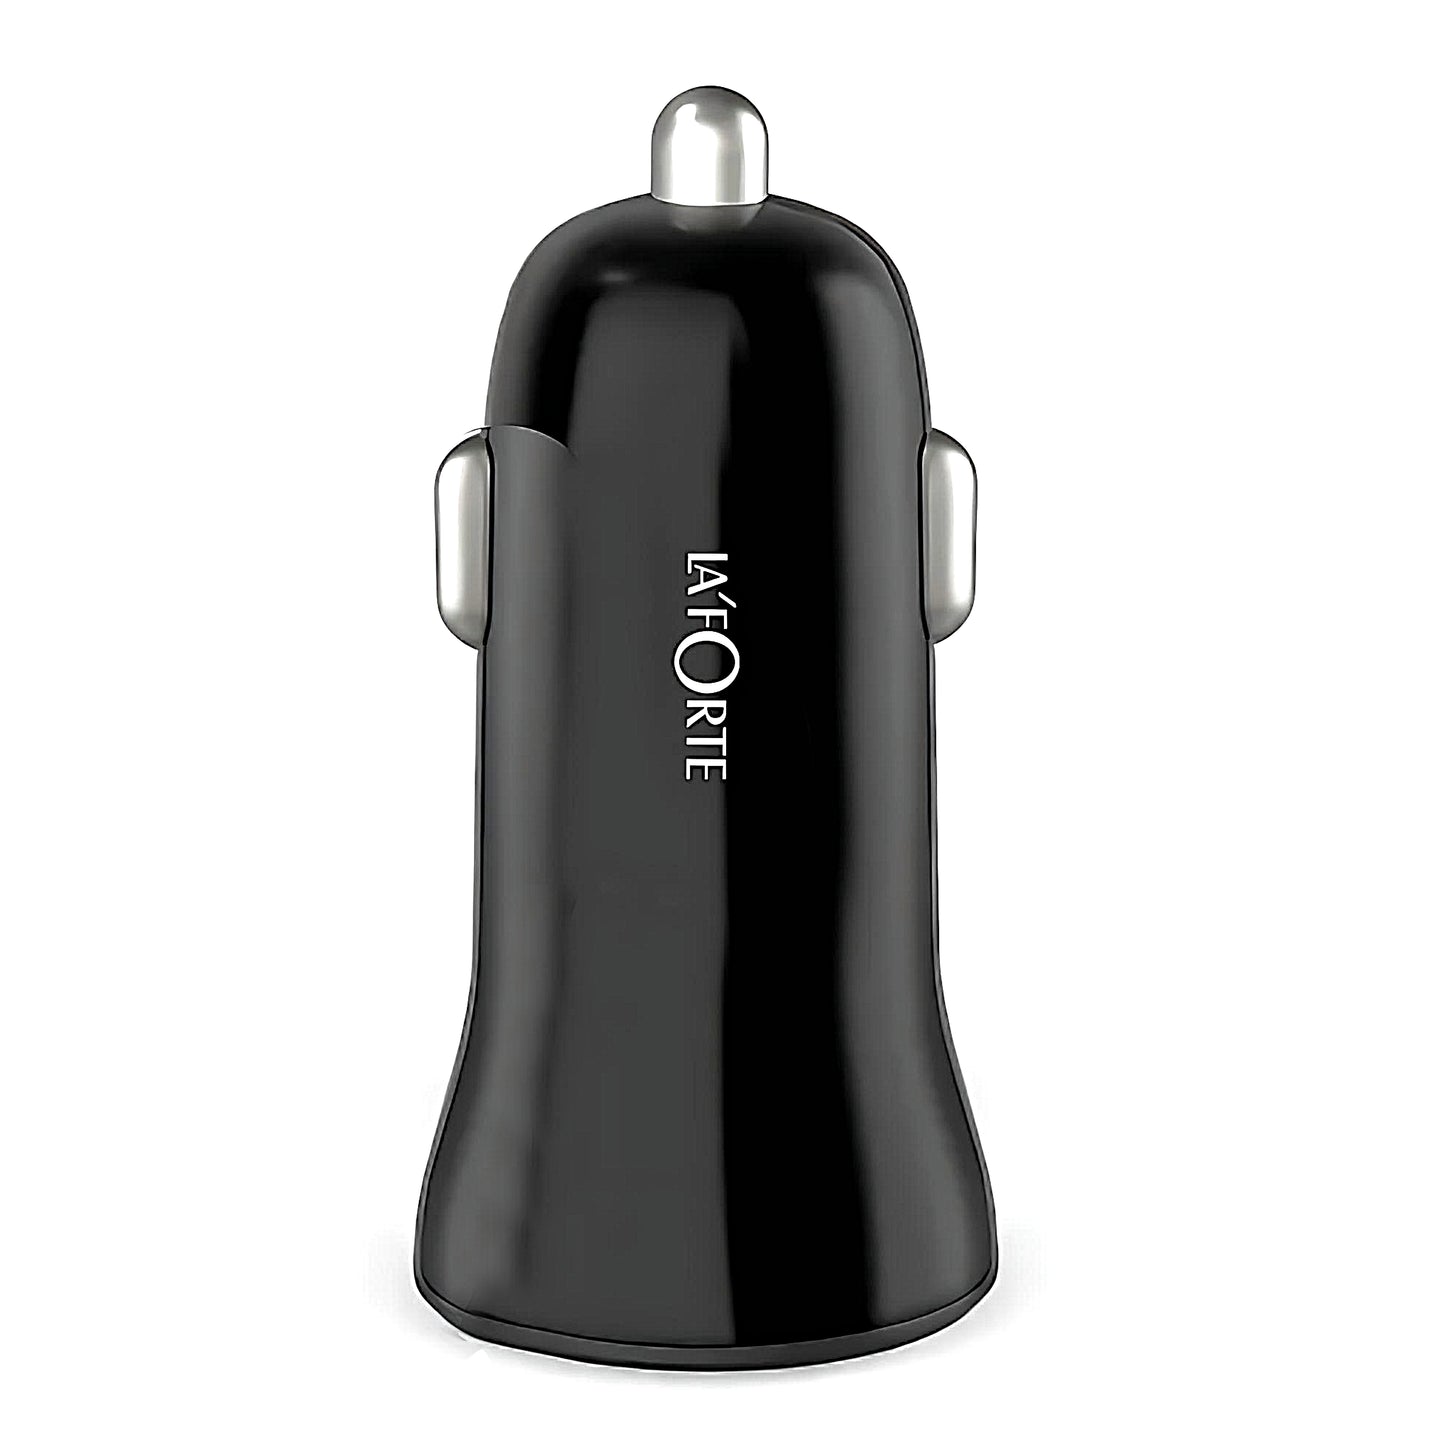 LA' FORTE Dual Port Car Charger 2.4 Amps with Type C Cable